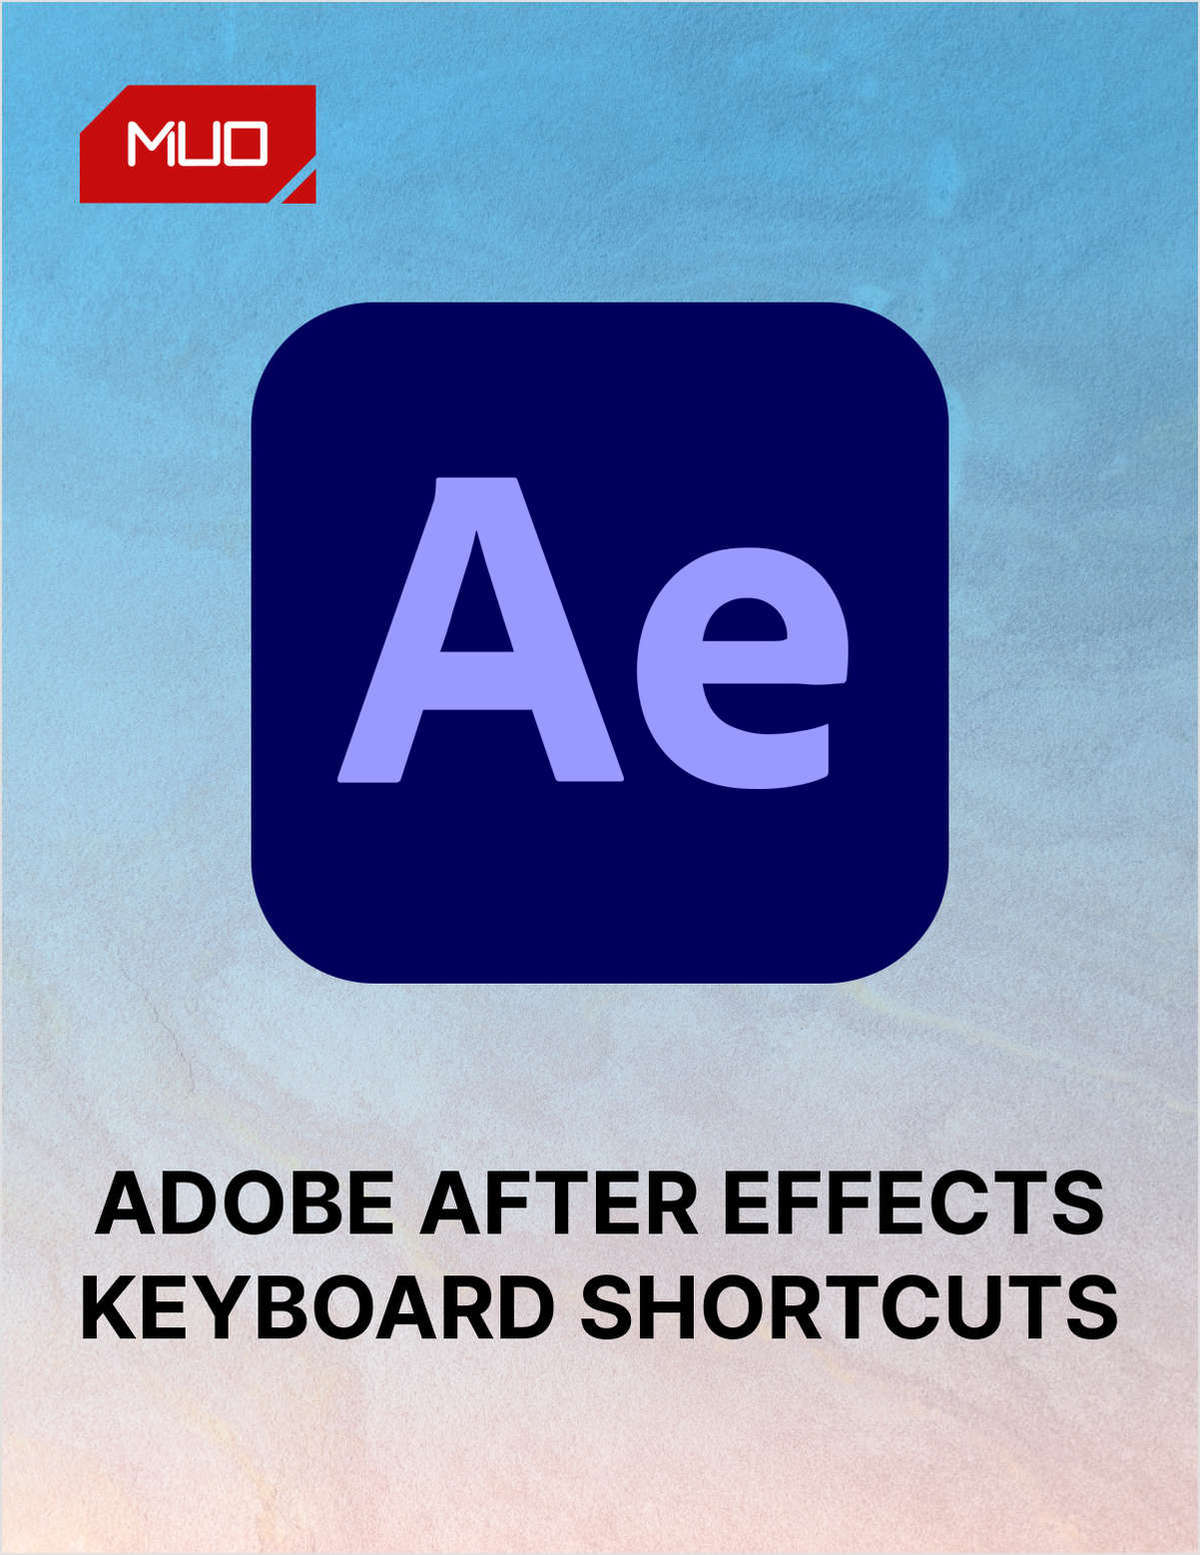 75+ Adobe After Effects Keyboard Shortcuts to Make Your Life Easier